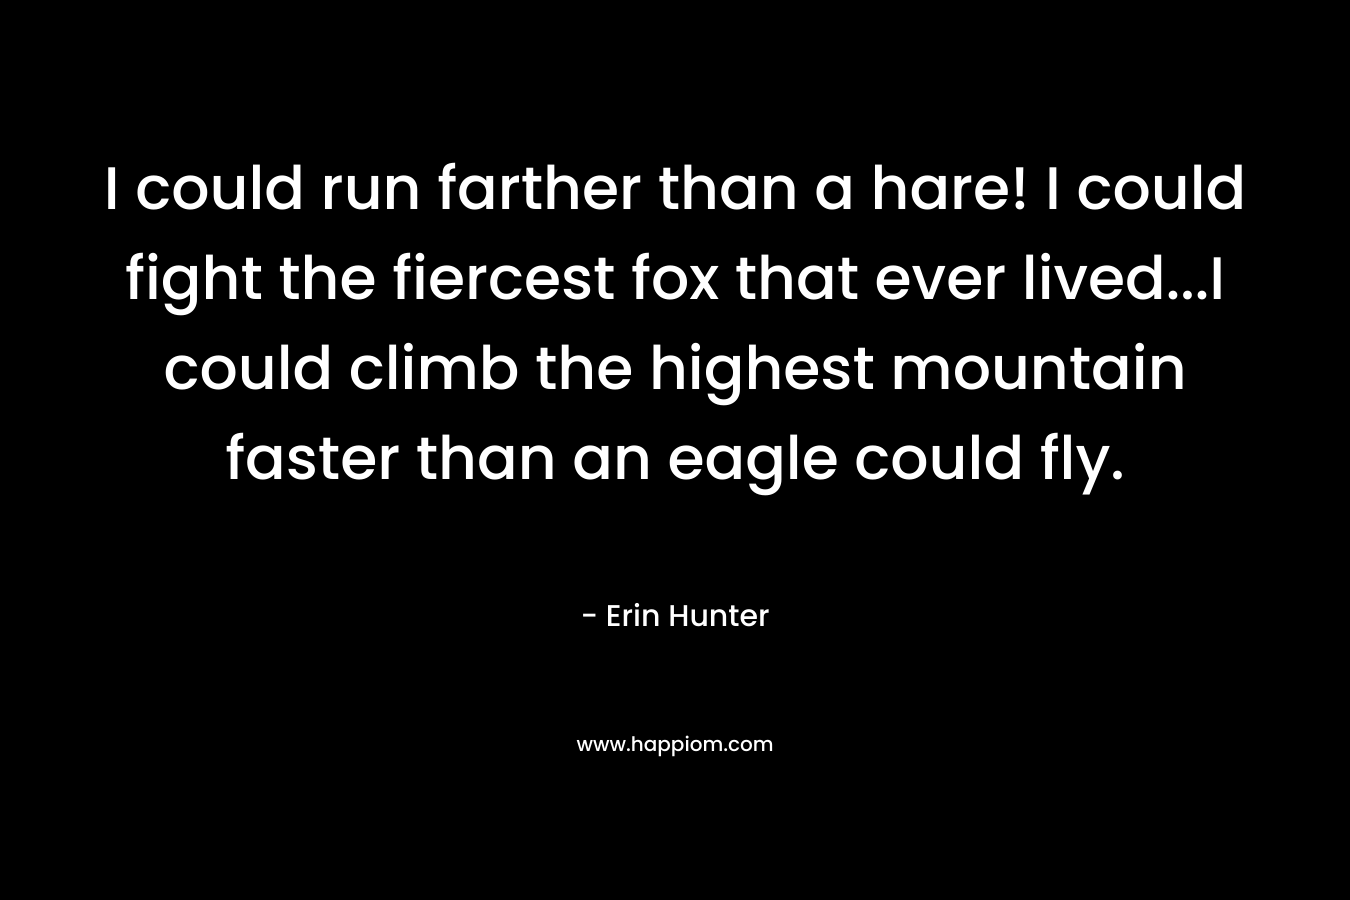 I could run farther than a hare! I could fight the fiercest fox that ever lived…I could climb the highest mountain faster than an eagle could fly. – Erin Hunter